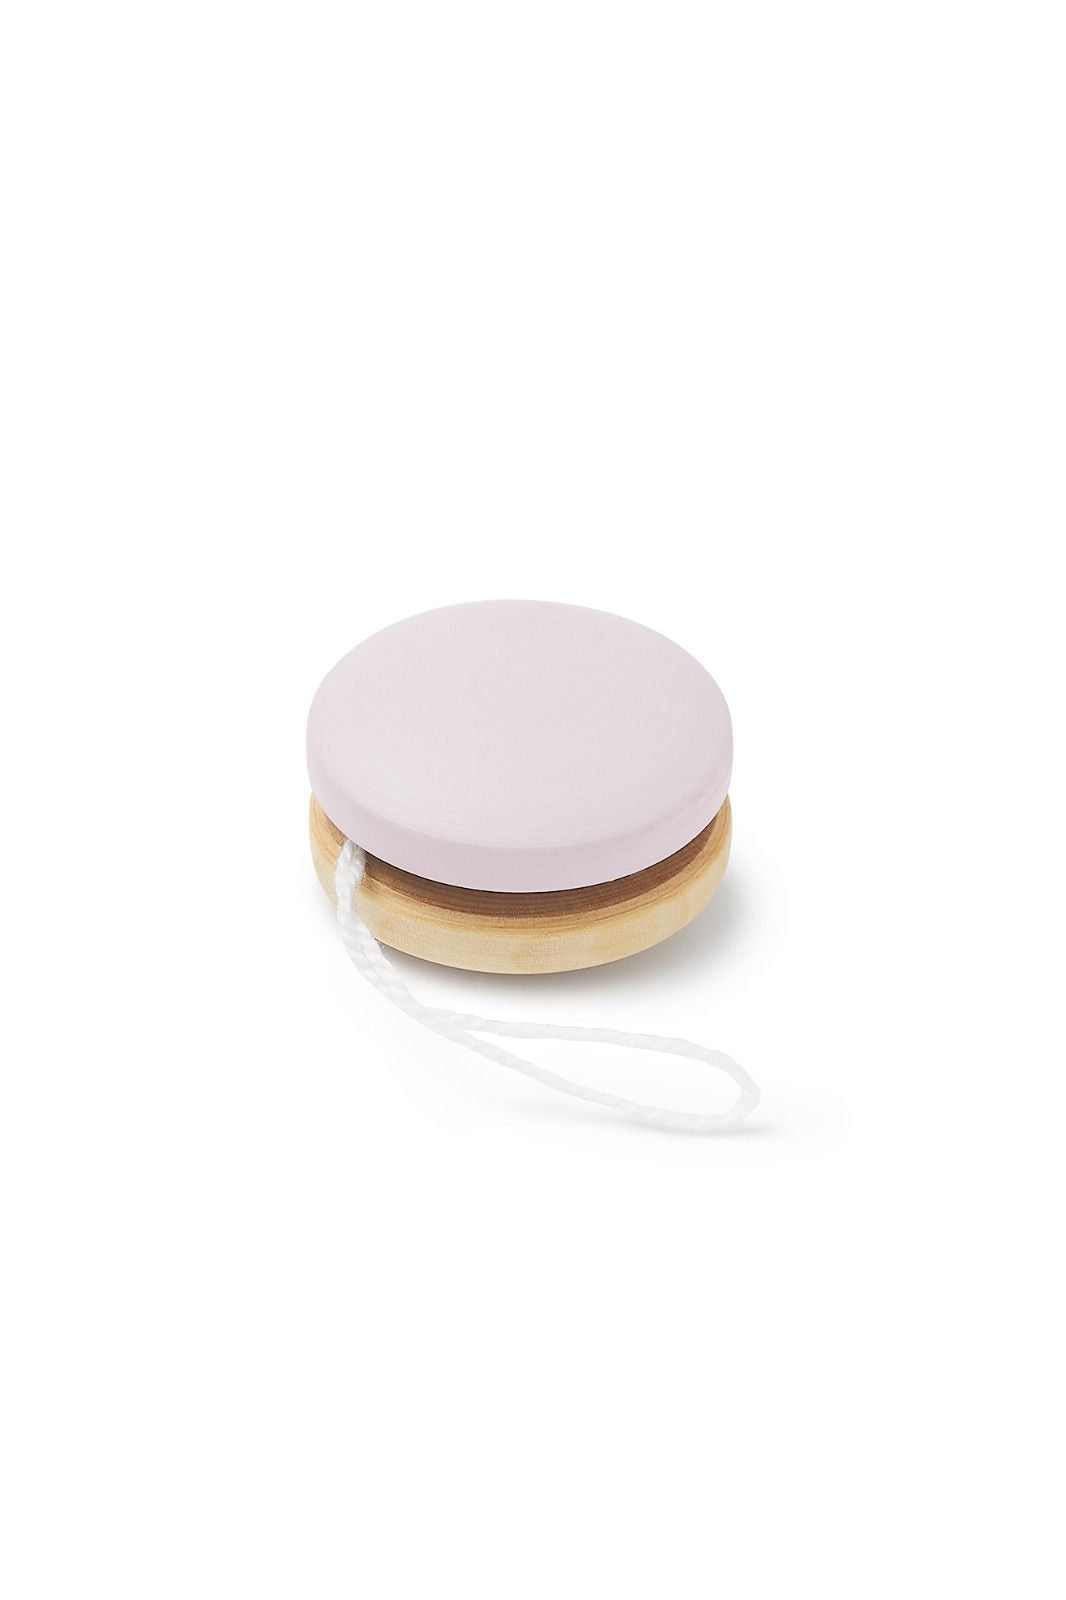 Mini Wooden YoYo- Eco-friendly and entertaining toy for sustainable and nostalgic play.